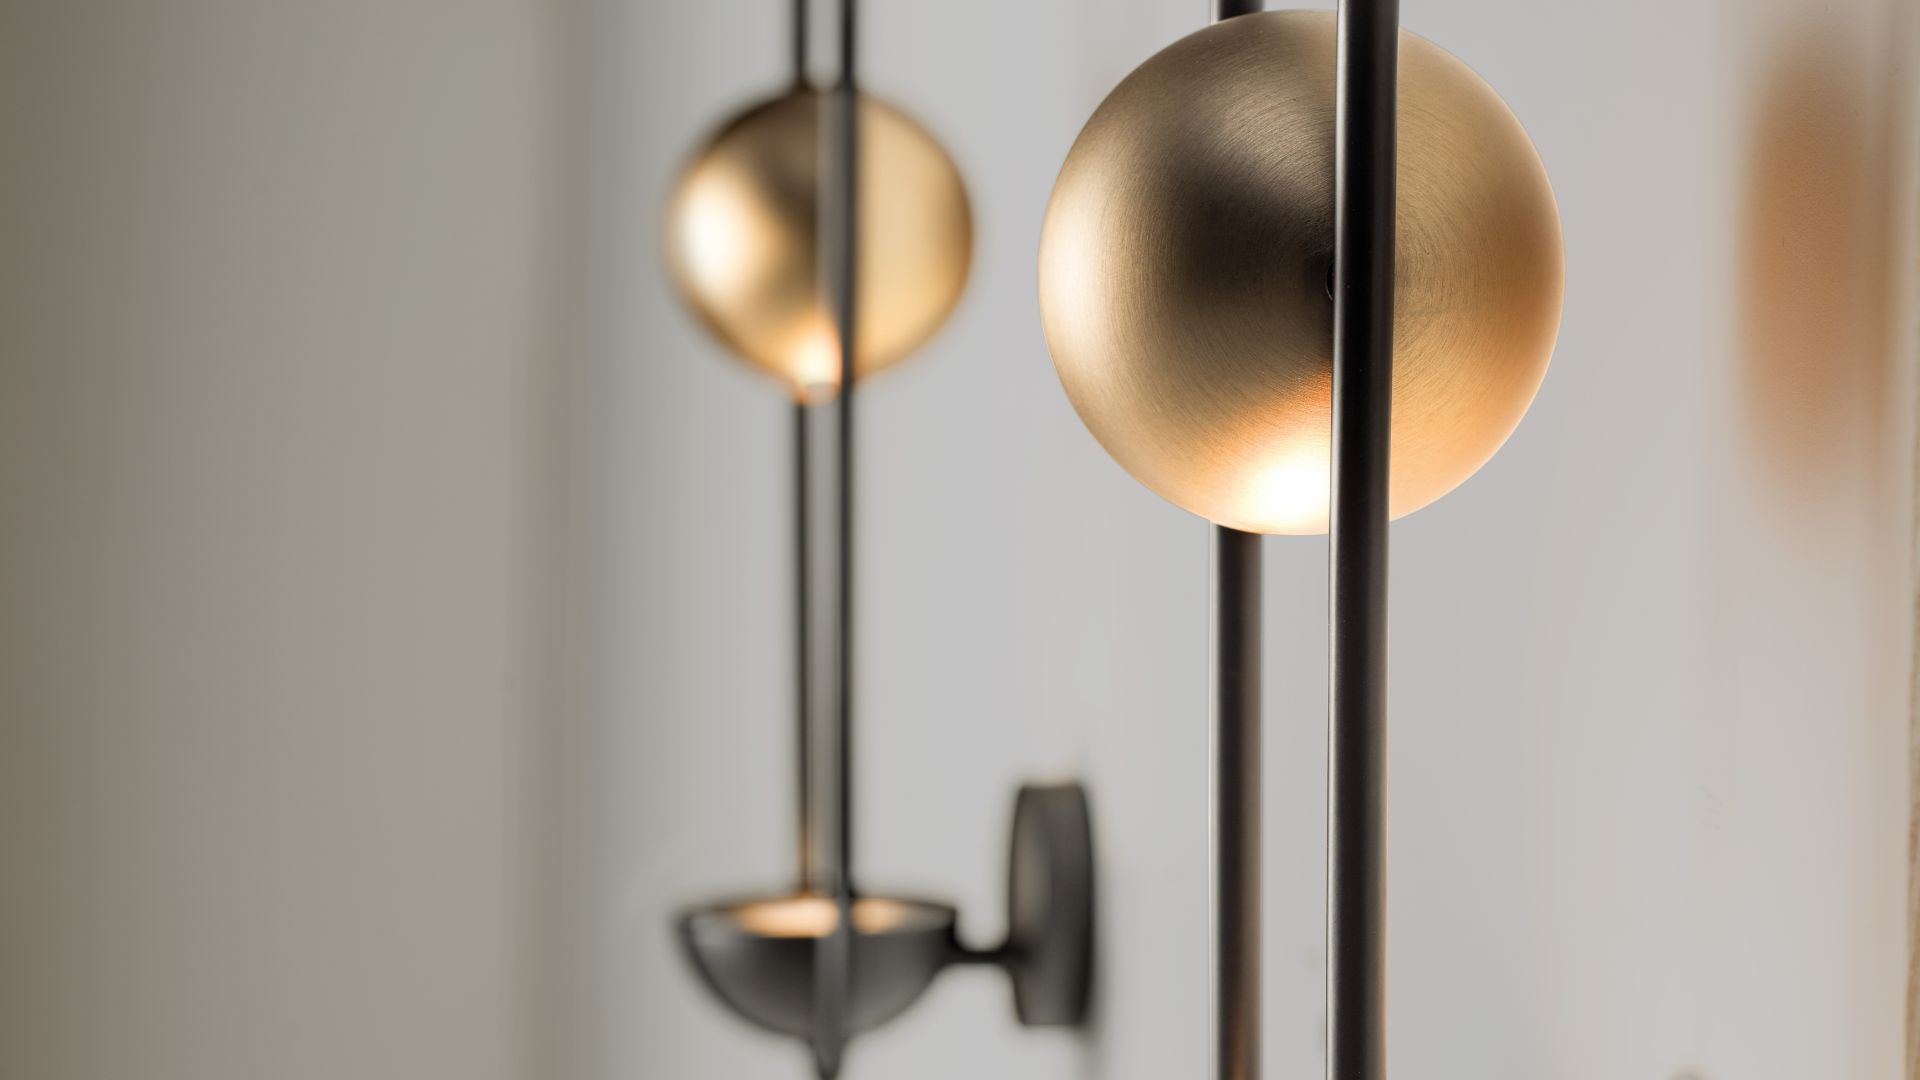 Luppiter lighting collection by Marco Zito for Masiero